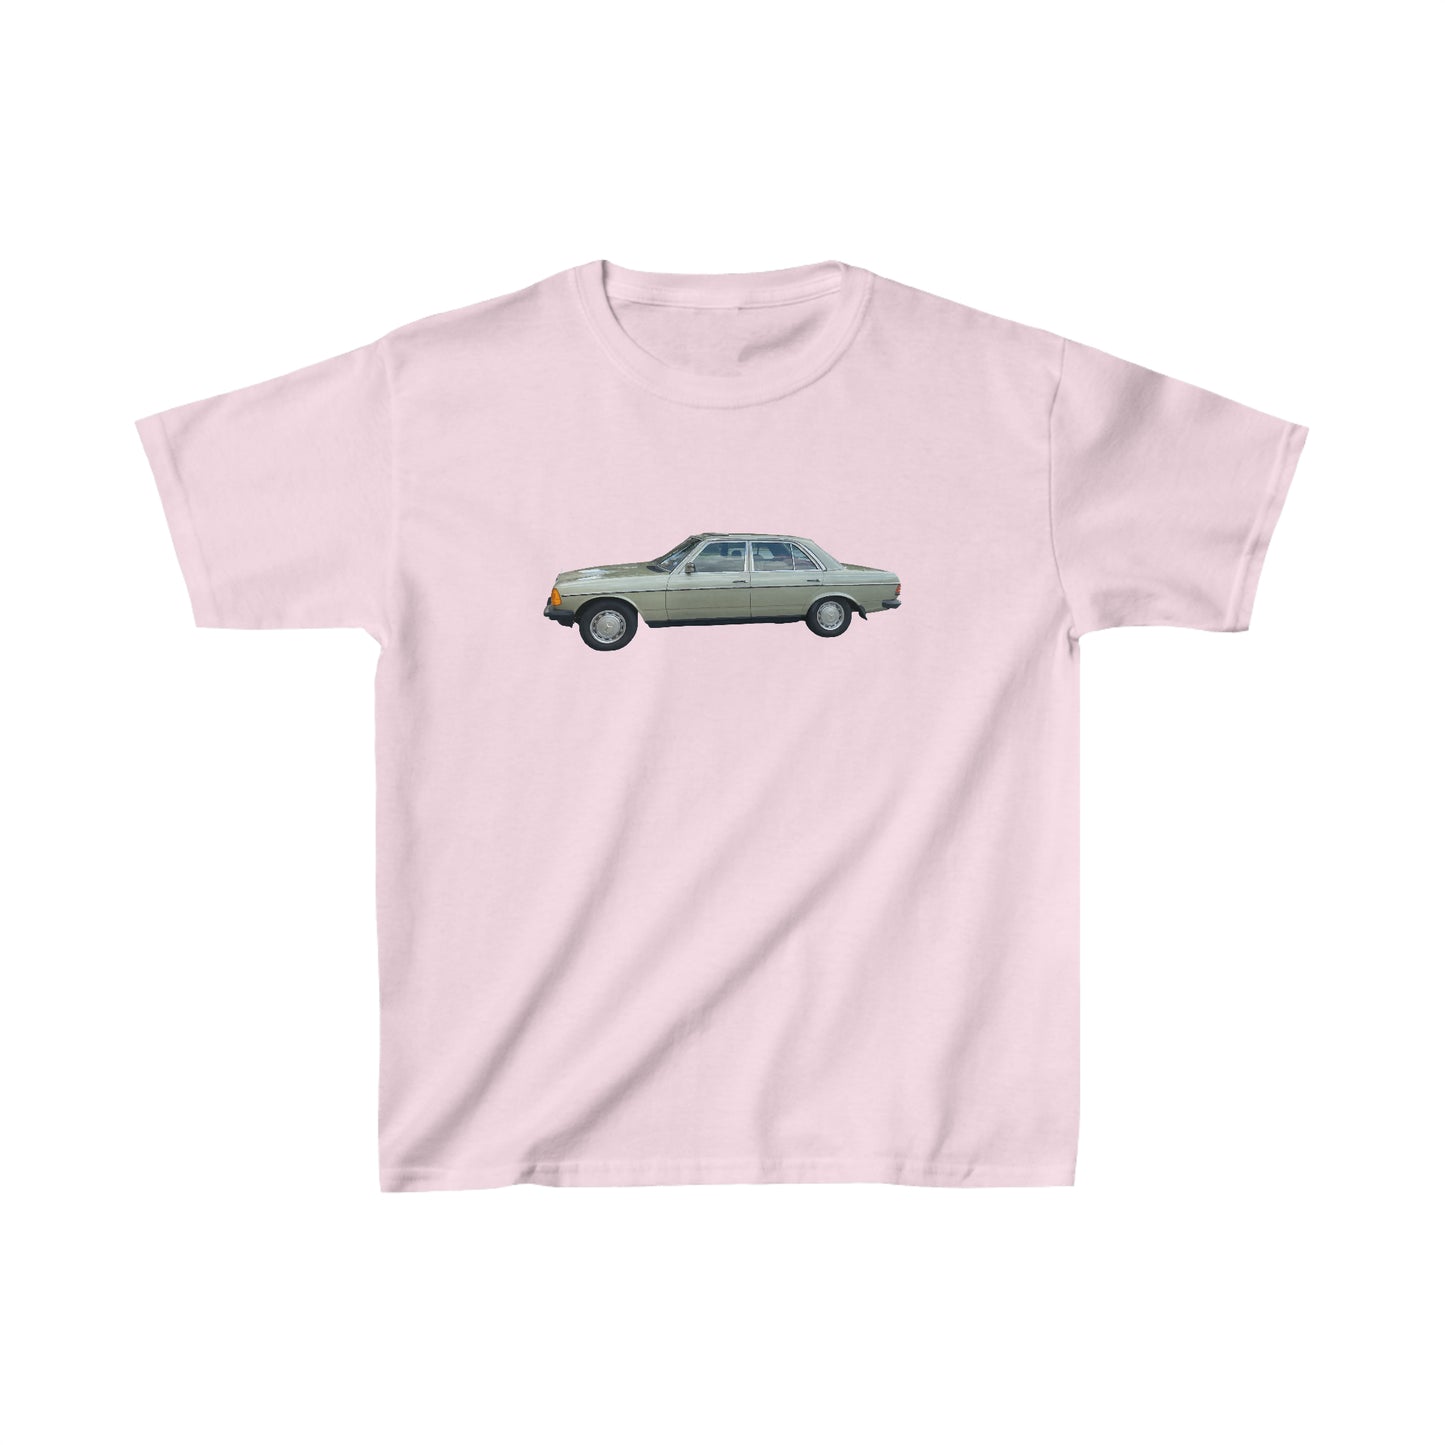 Antique Mercedes Boxy Fit Baby Tee